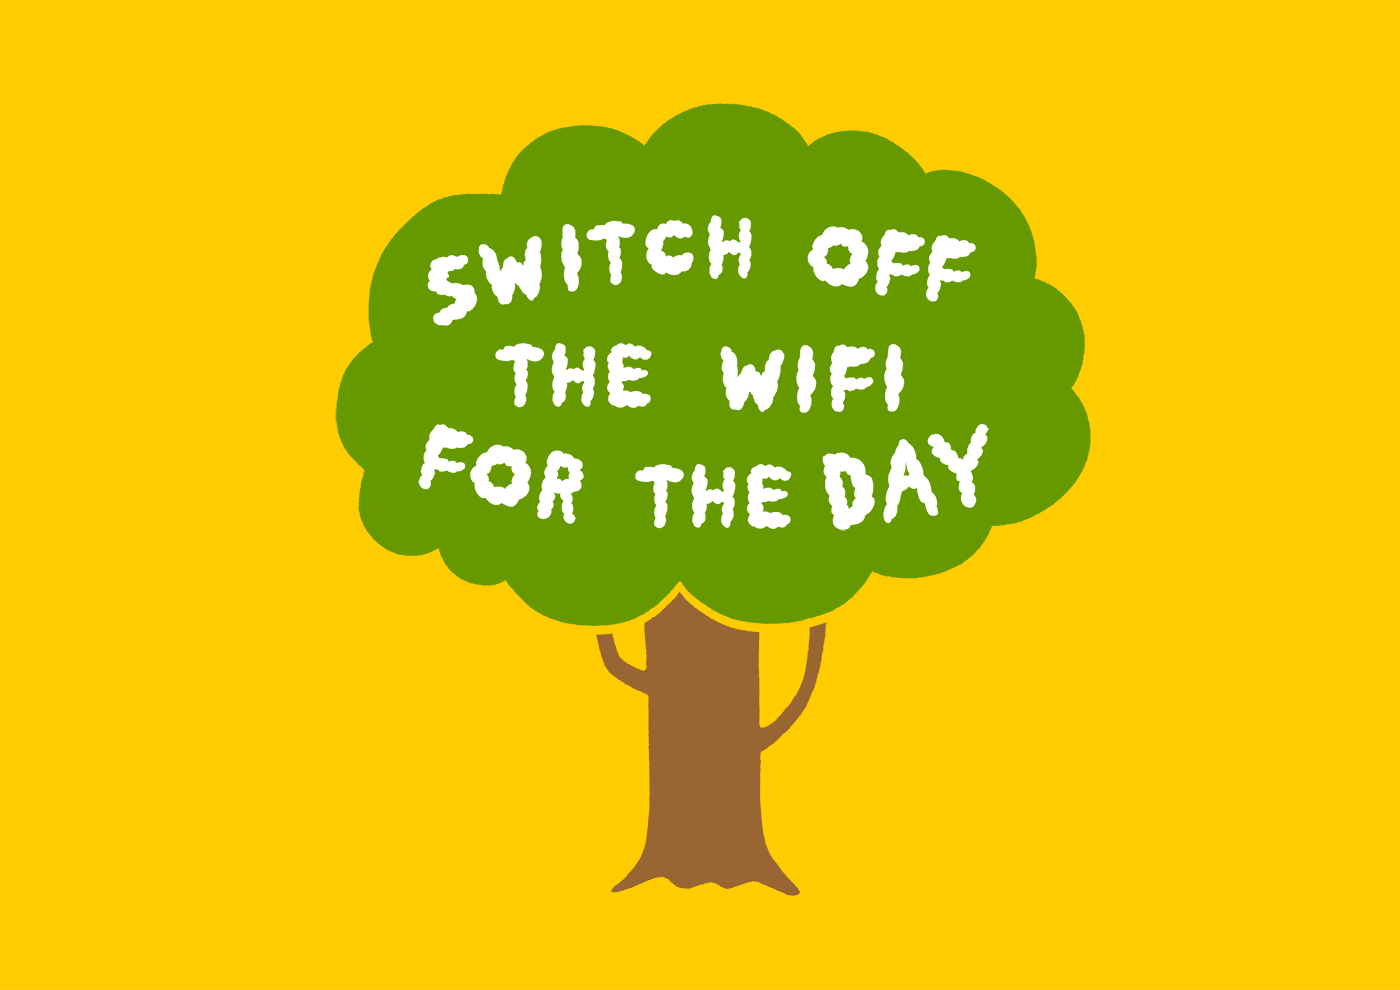 Switch off the wifi for the day